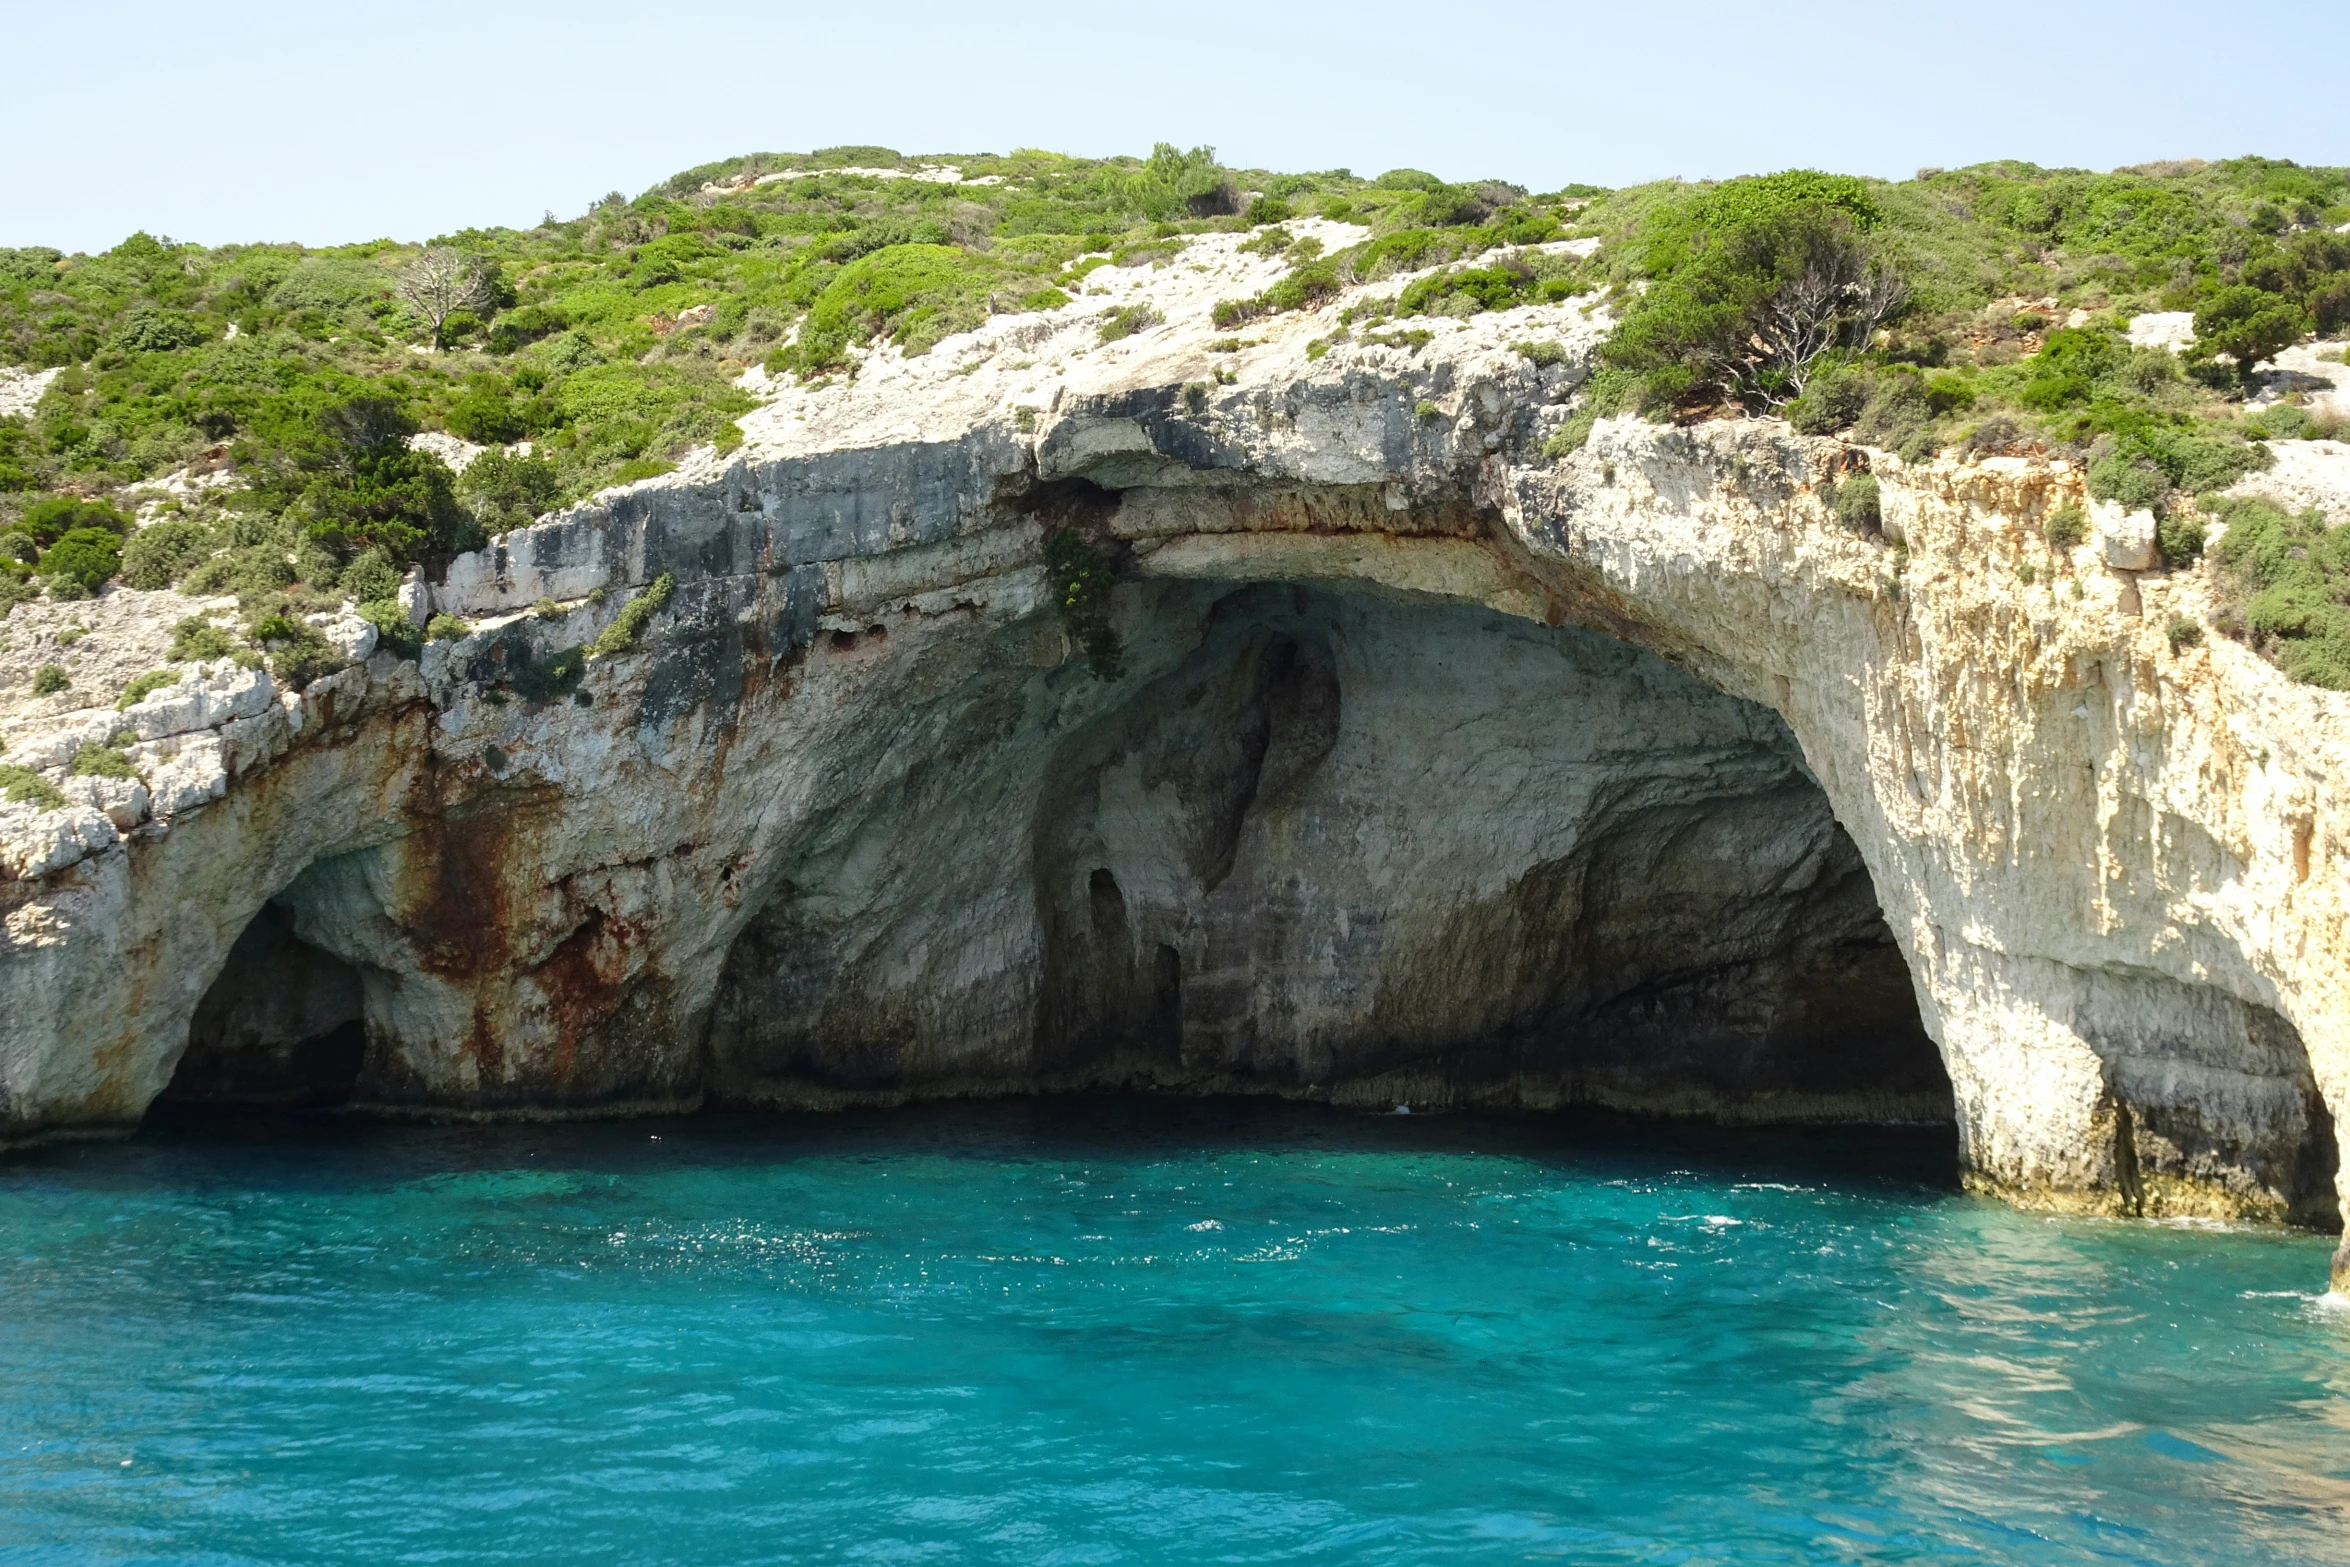 the rock formations face the water with blue hues